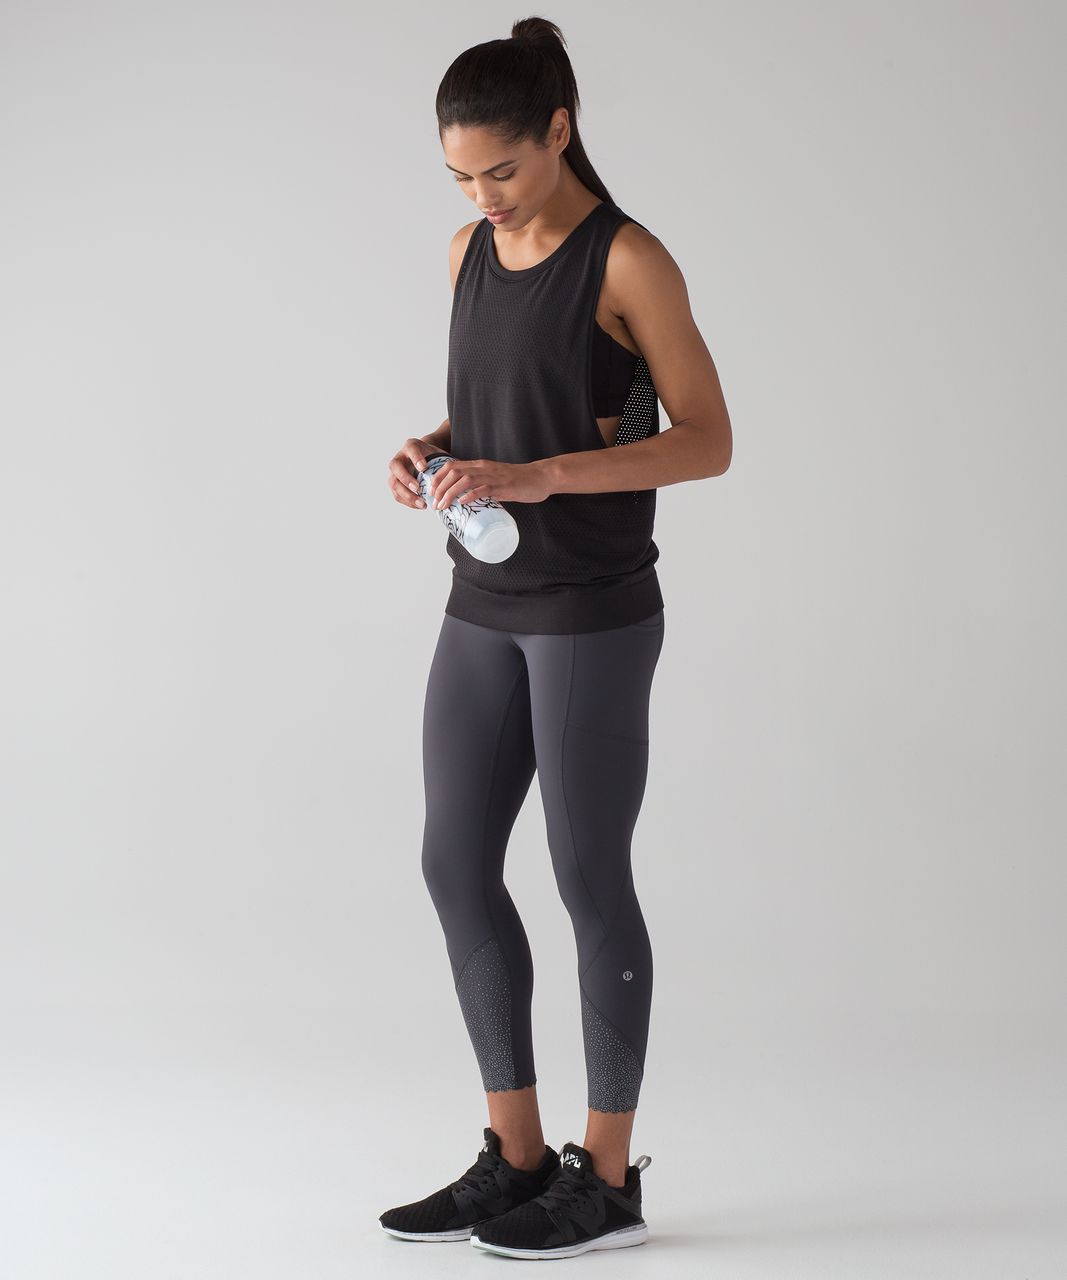 Lululemon Tight Stuff Tight II (25) leggings Nocturnal Teal Size 6 - $23 -  From Isabelle